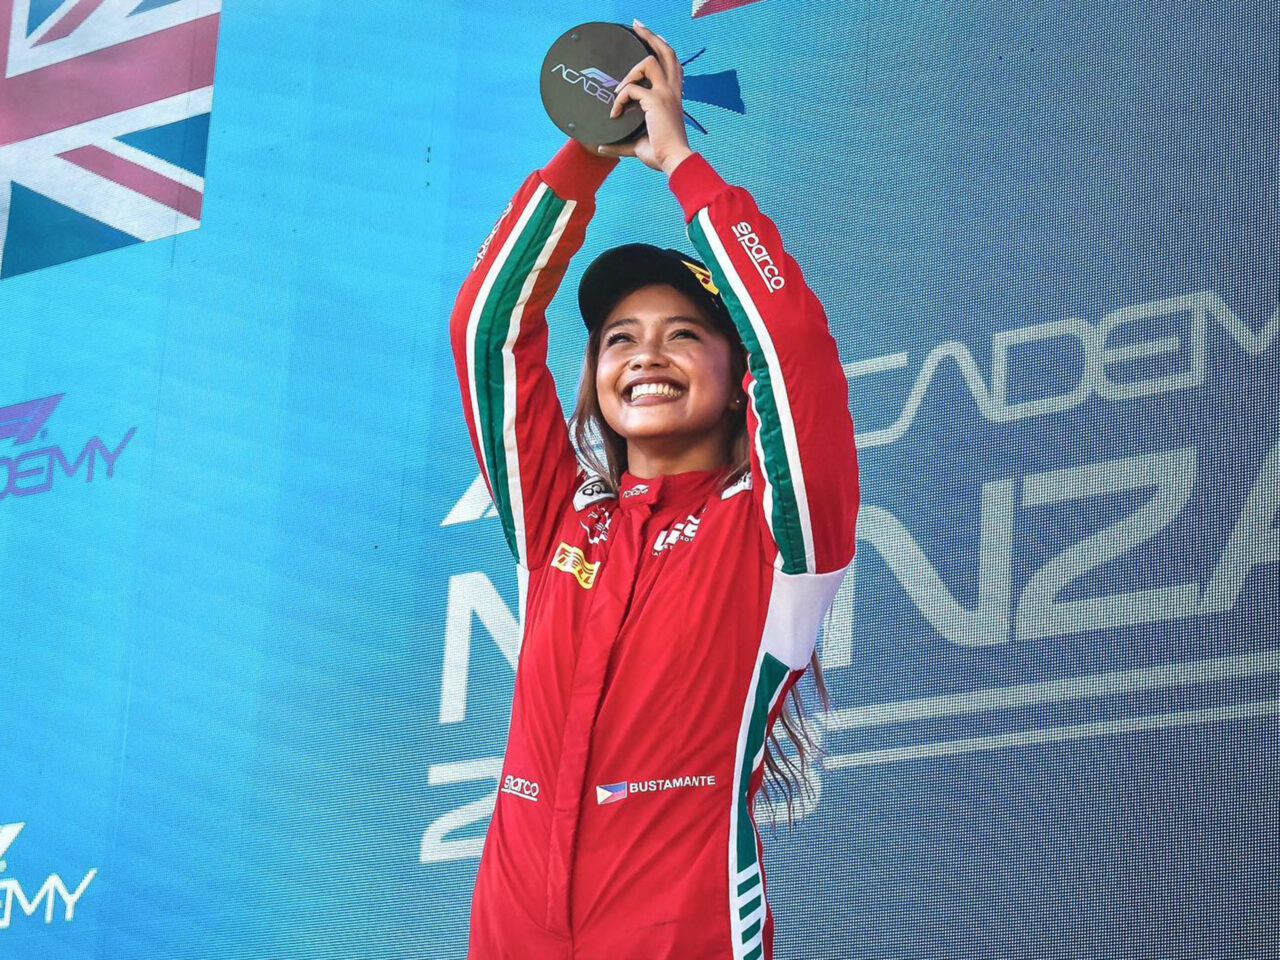 Bianca Bustamante lifts her award at the podium in Monza, Italy